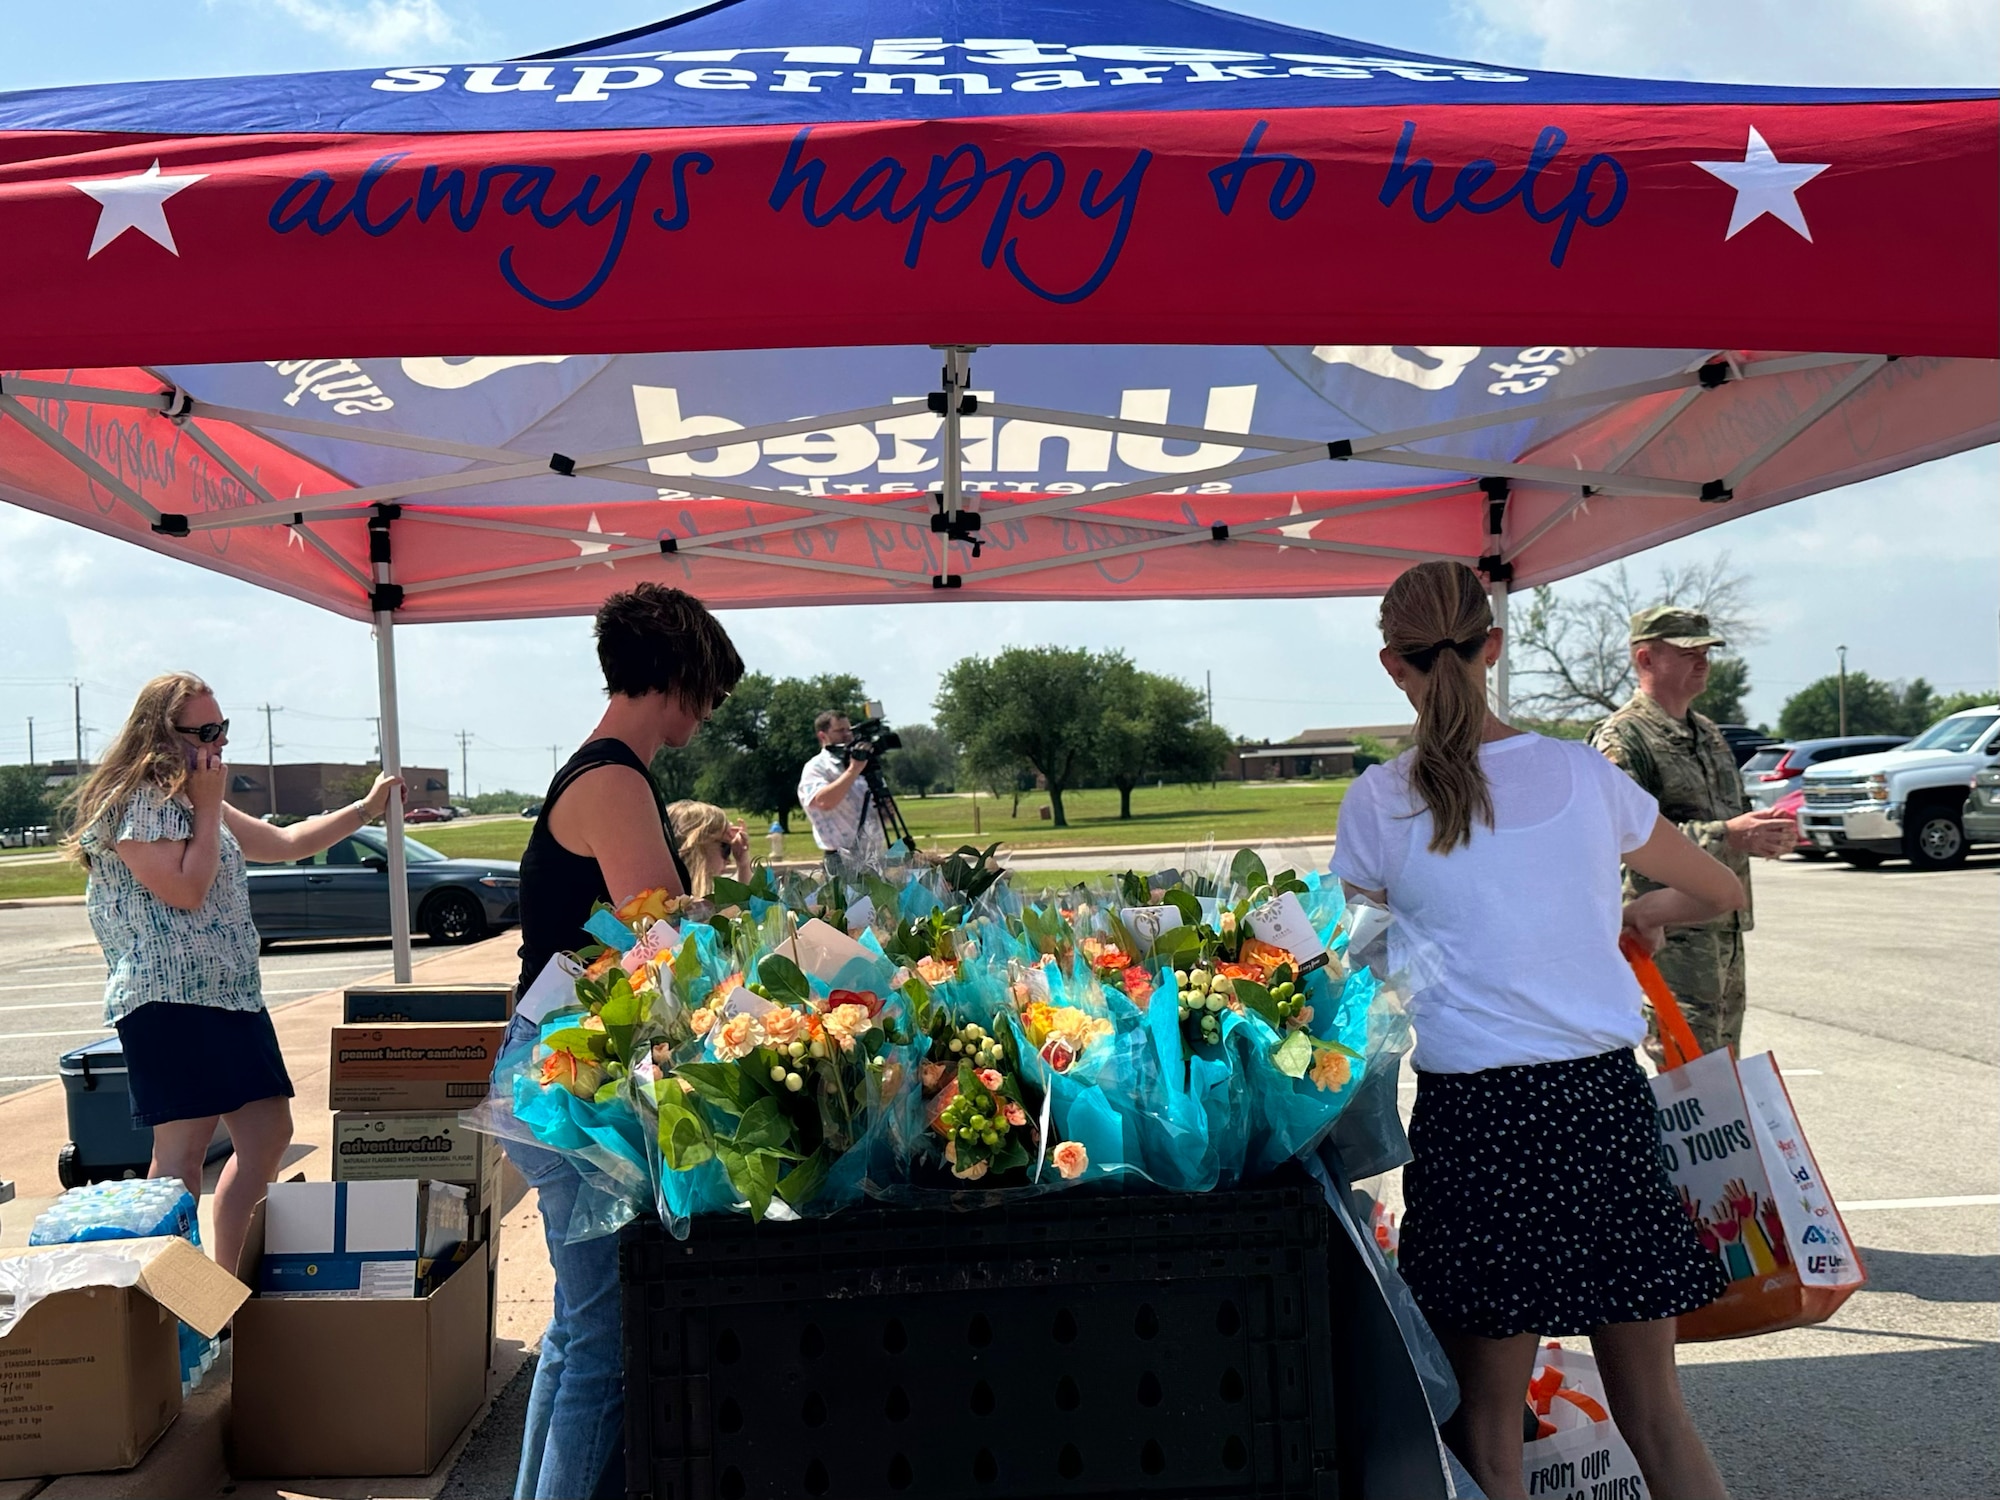 Dyess personnel prepare goodie bags at a Military Spouse Appreciation Day event at Dyess Air Force Base, Texas, May 12, 2023. Bouquets of flowers and goodie bags were distributed to military spouses to honor them for their support and sacrifices. The first Military Spouse Appreciation Day was declared in 1984 by President Ronald Reagan; the day now falls on the Friday before Mother’s Day. (U.S. Air Force photo by Airman 1st Class Emma Anderson)